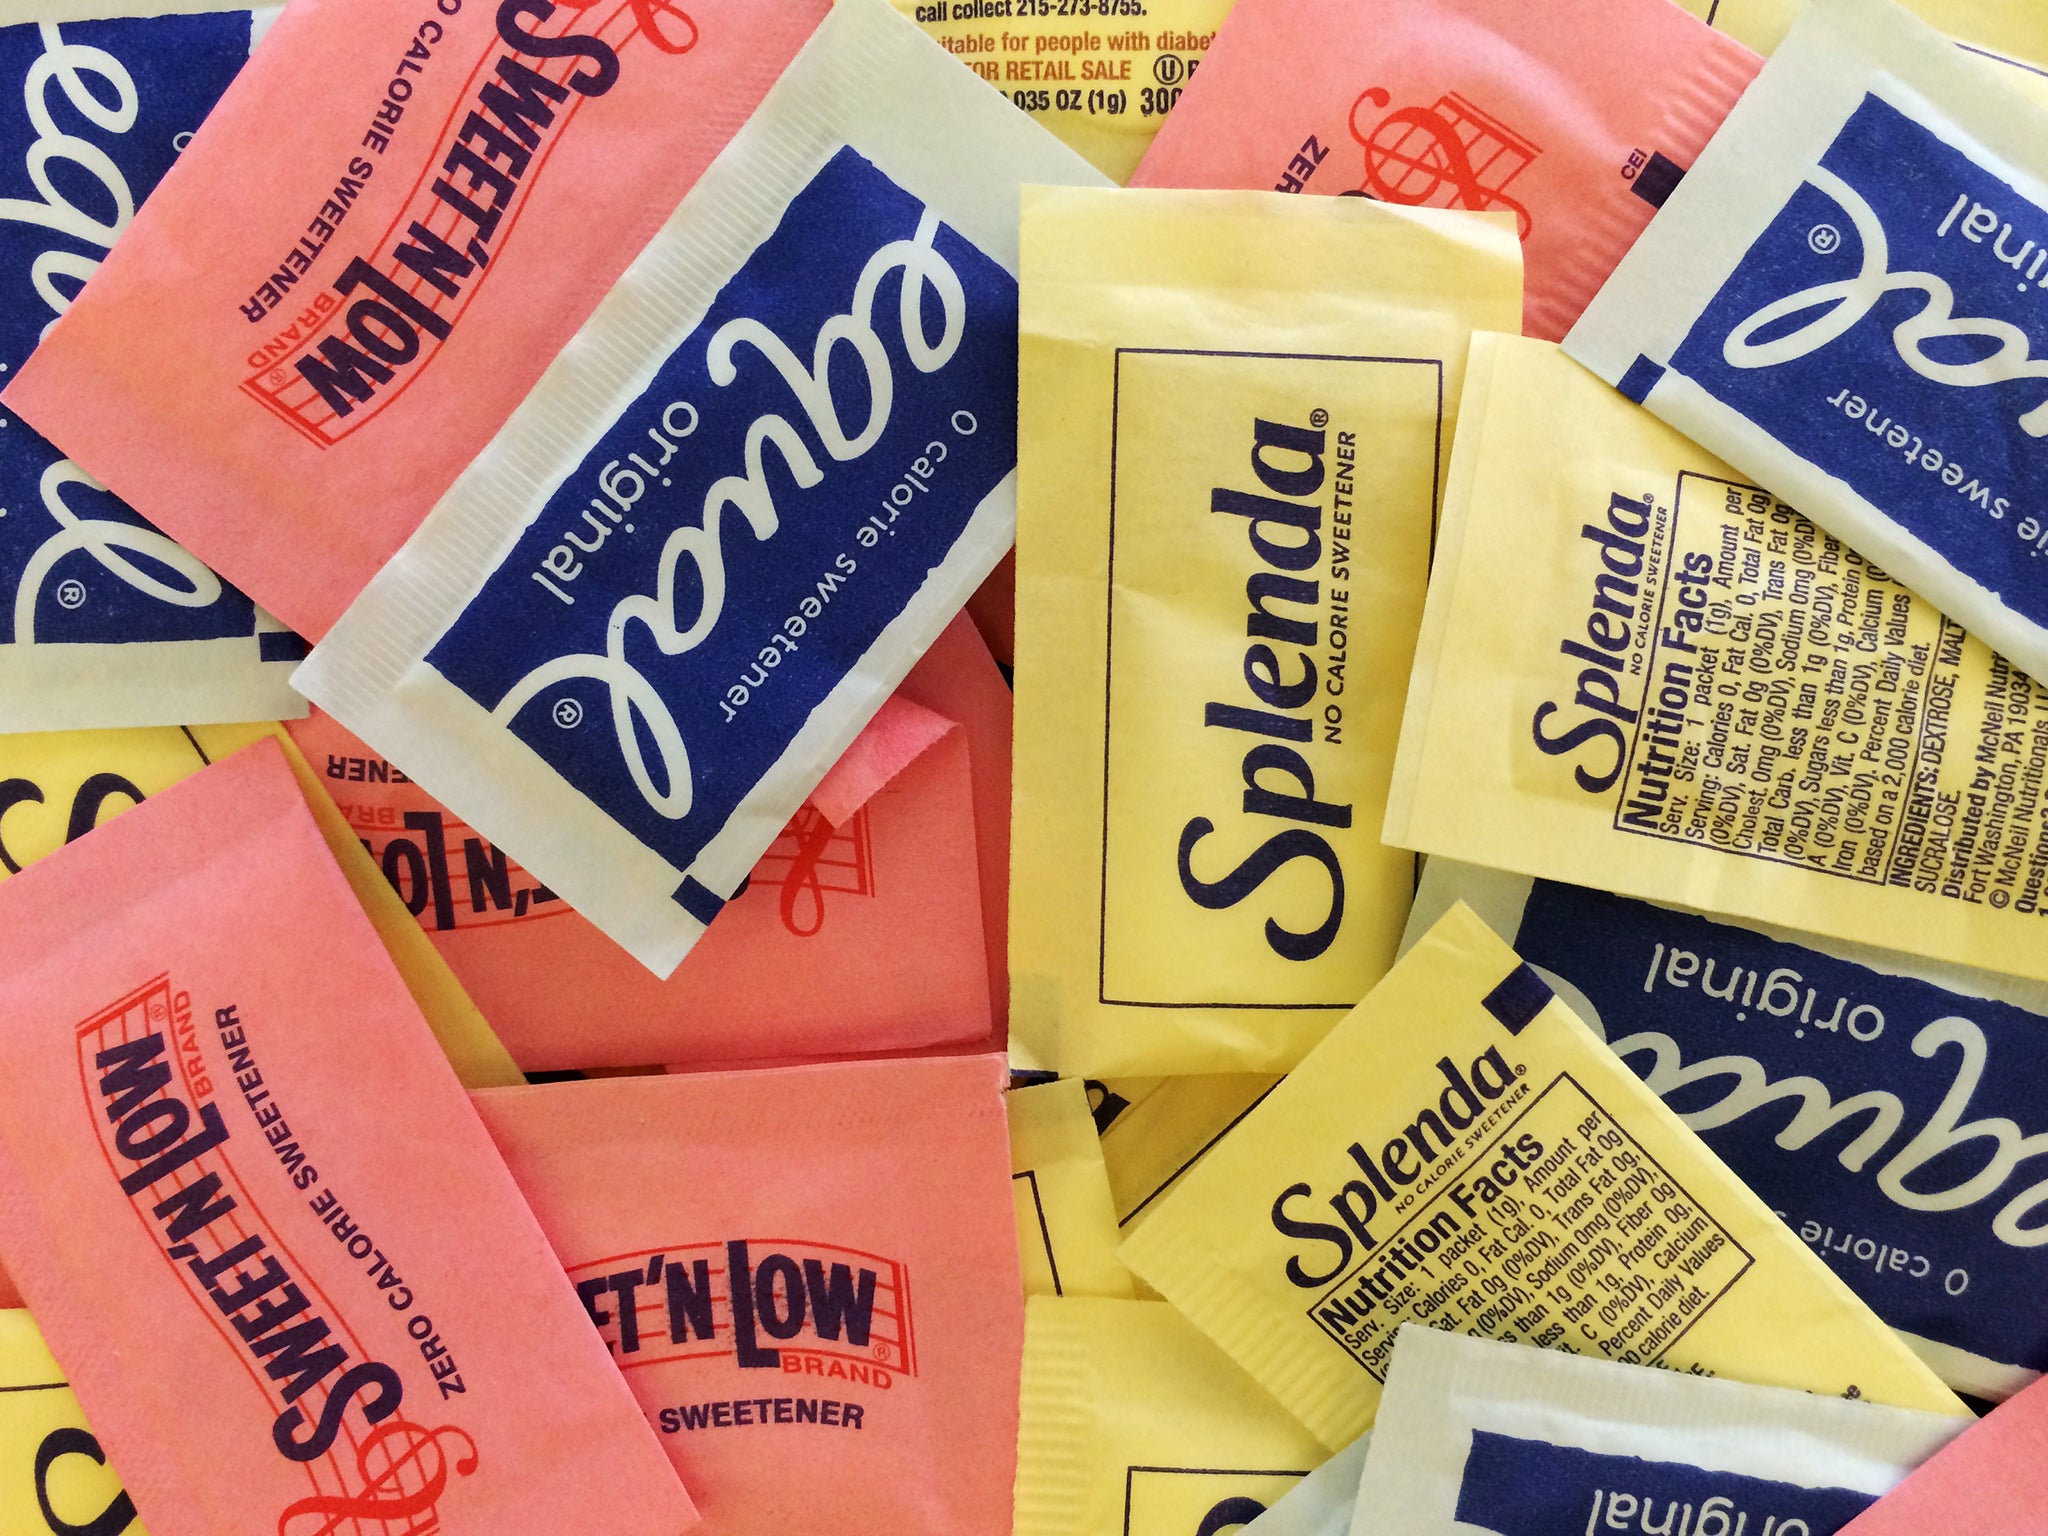 Artificial sweeteners may set the stage for diabetes in some people